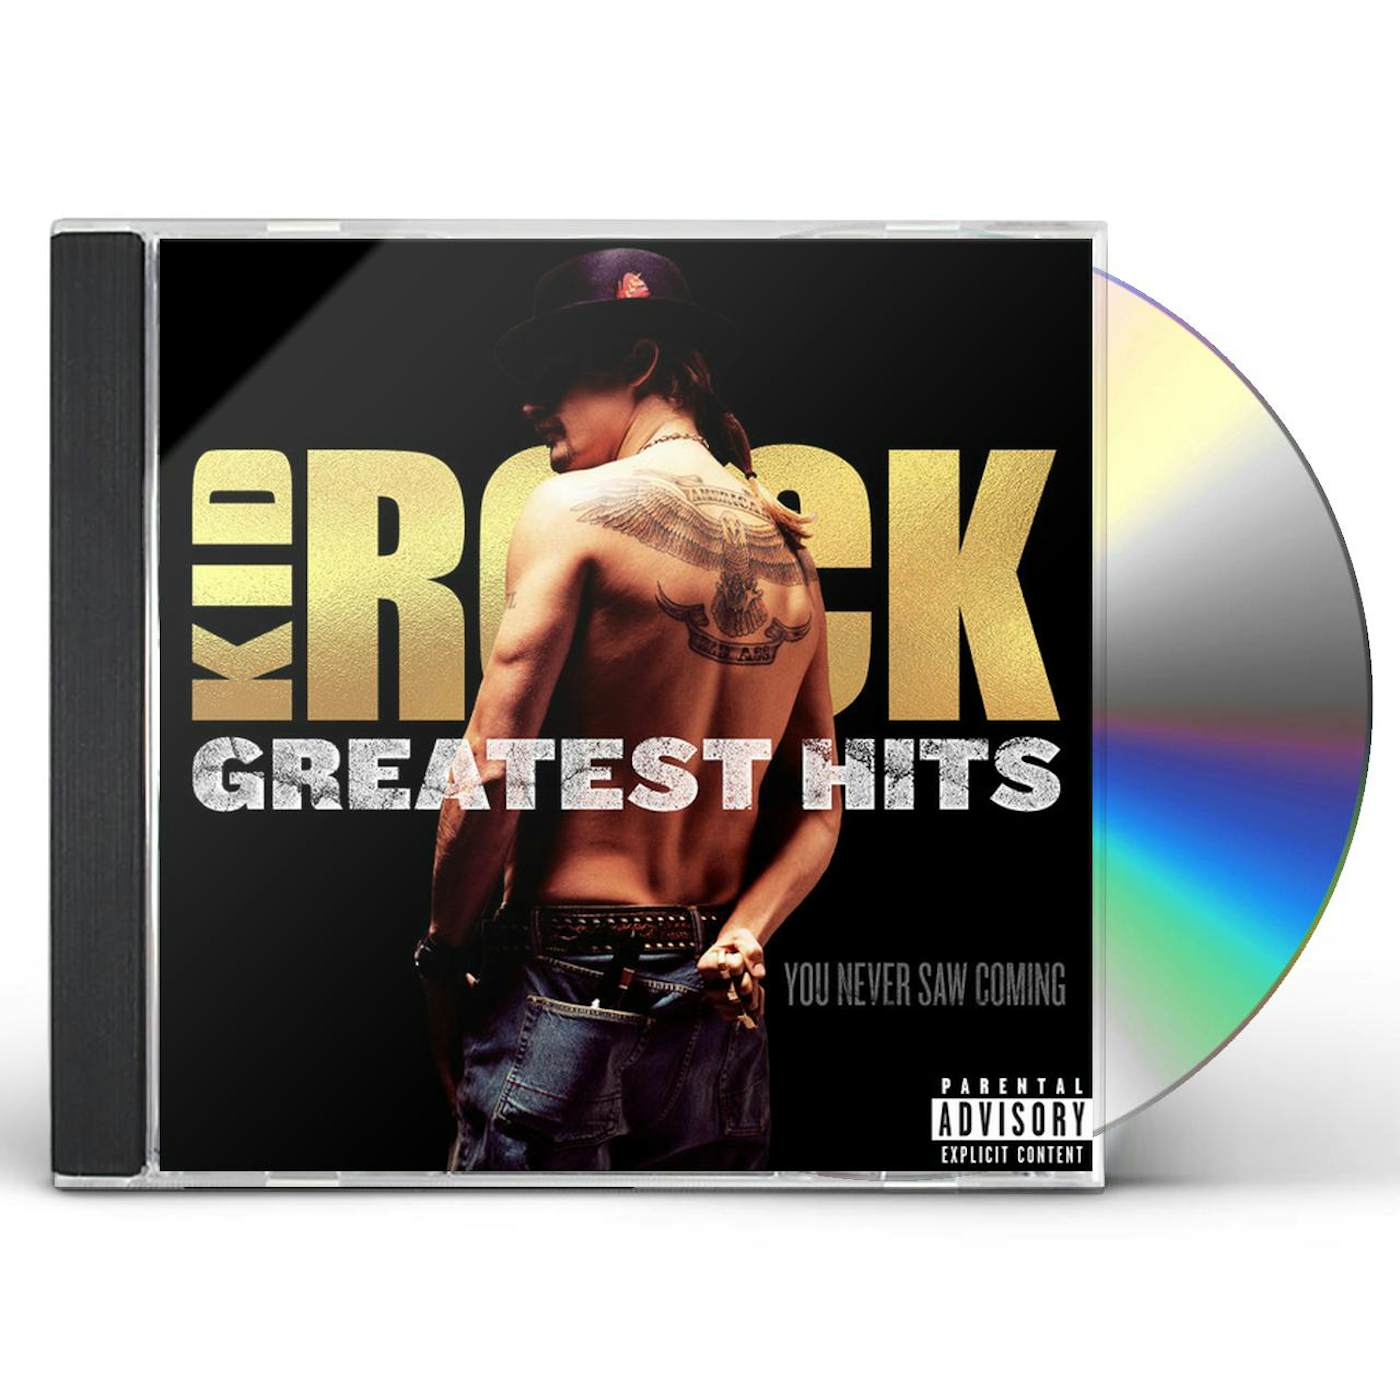 Kid Rock GREATEST HITS: YOU NEVER SAW COMING CD $22.49$19.99